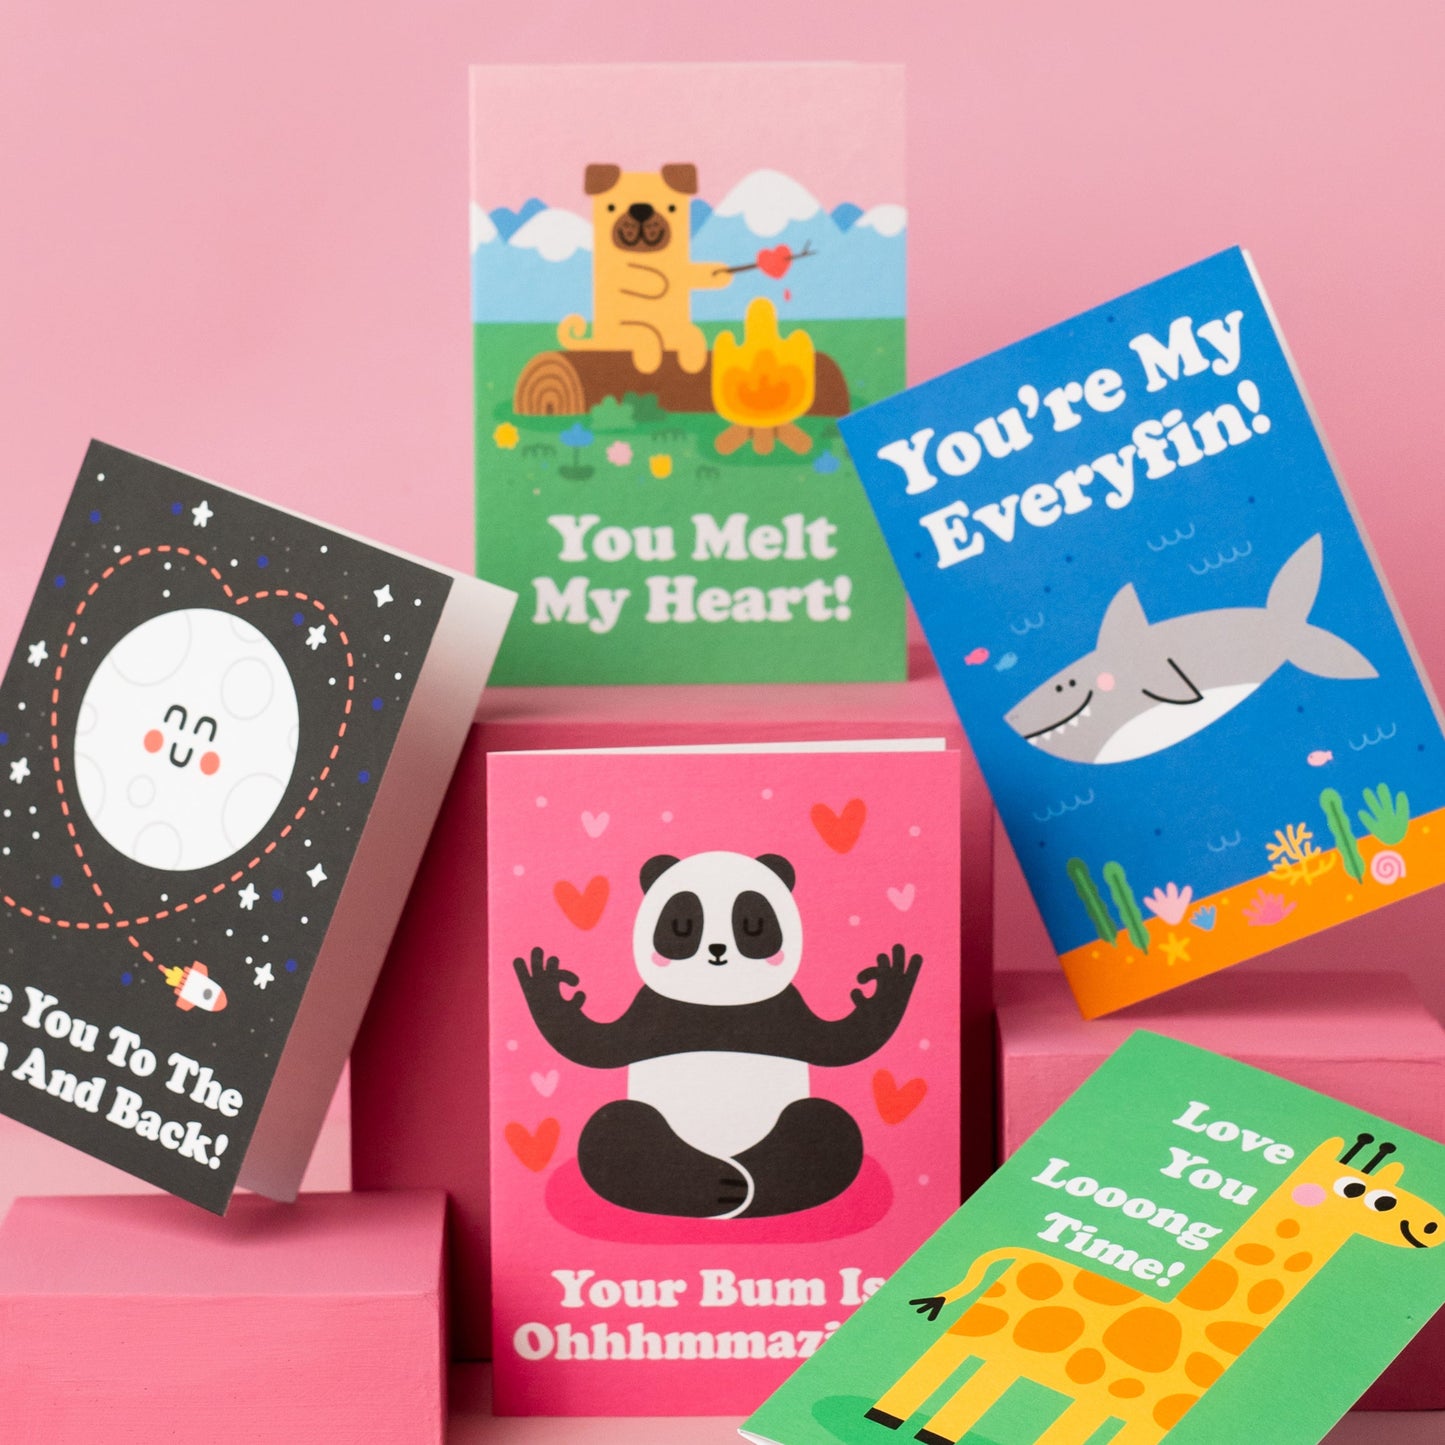 photograph of five valentine's day cards featuring a panda, a giraffe, a shark, a dog and the moon on a pink background arranged beautifully